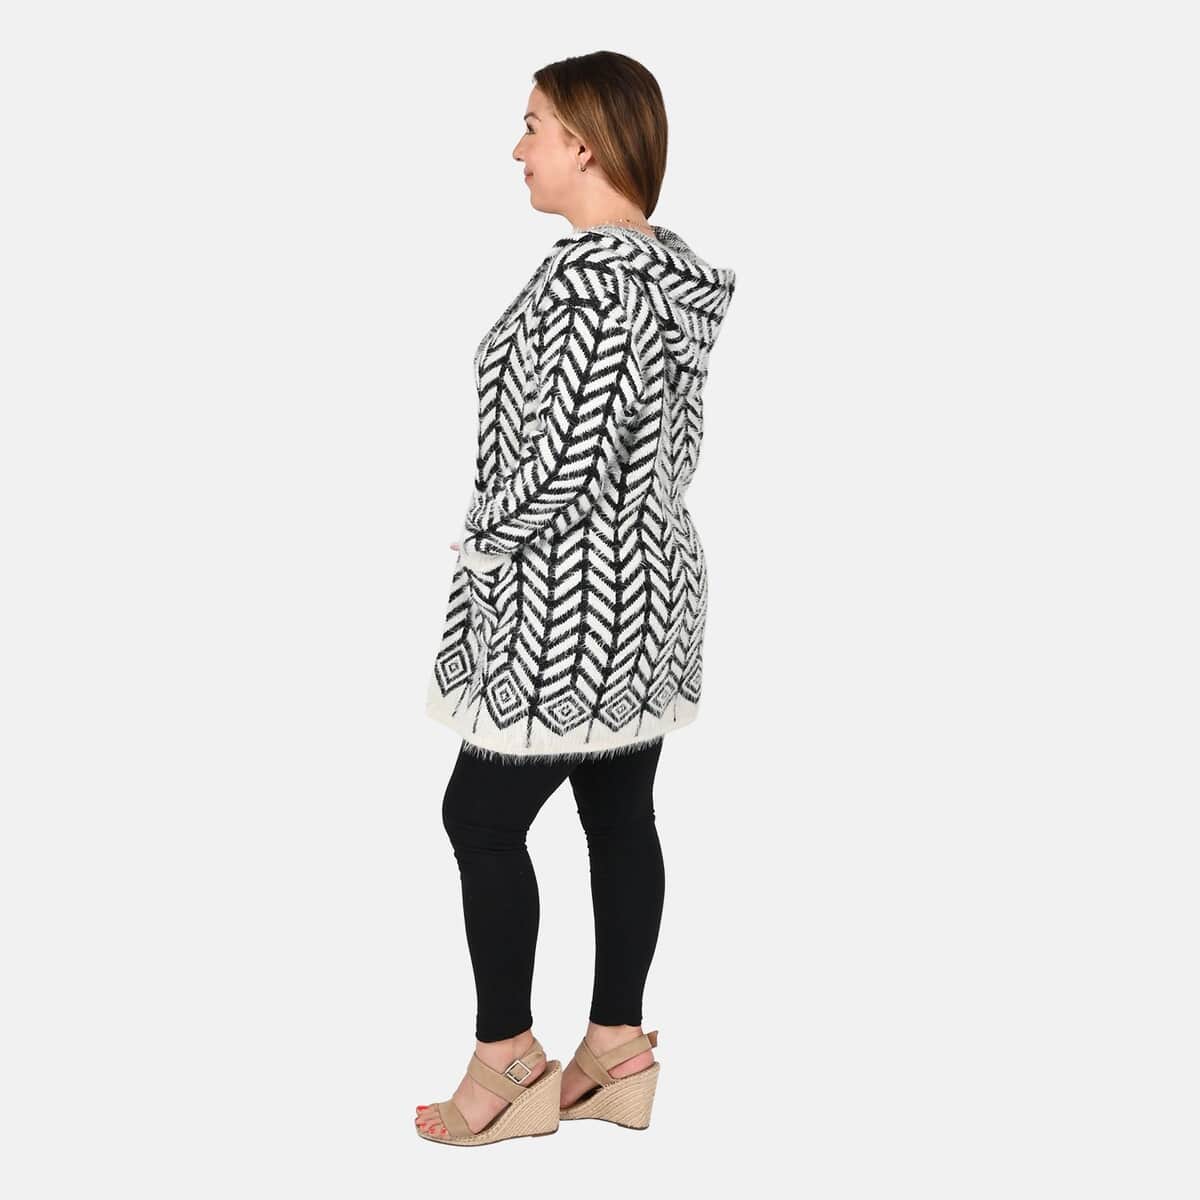 Tamsy White with Black Chevron Pattern Winter Hoodie with 2 Pocket - One Size Fits Most image number 2